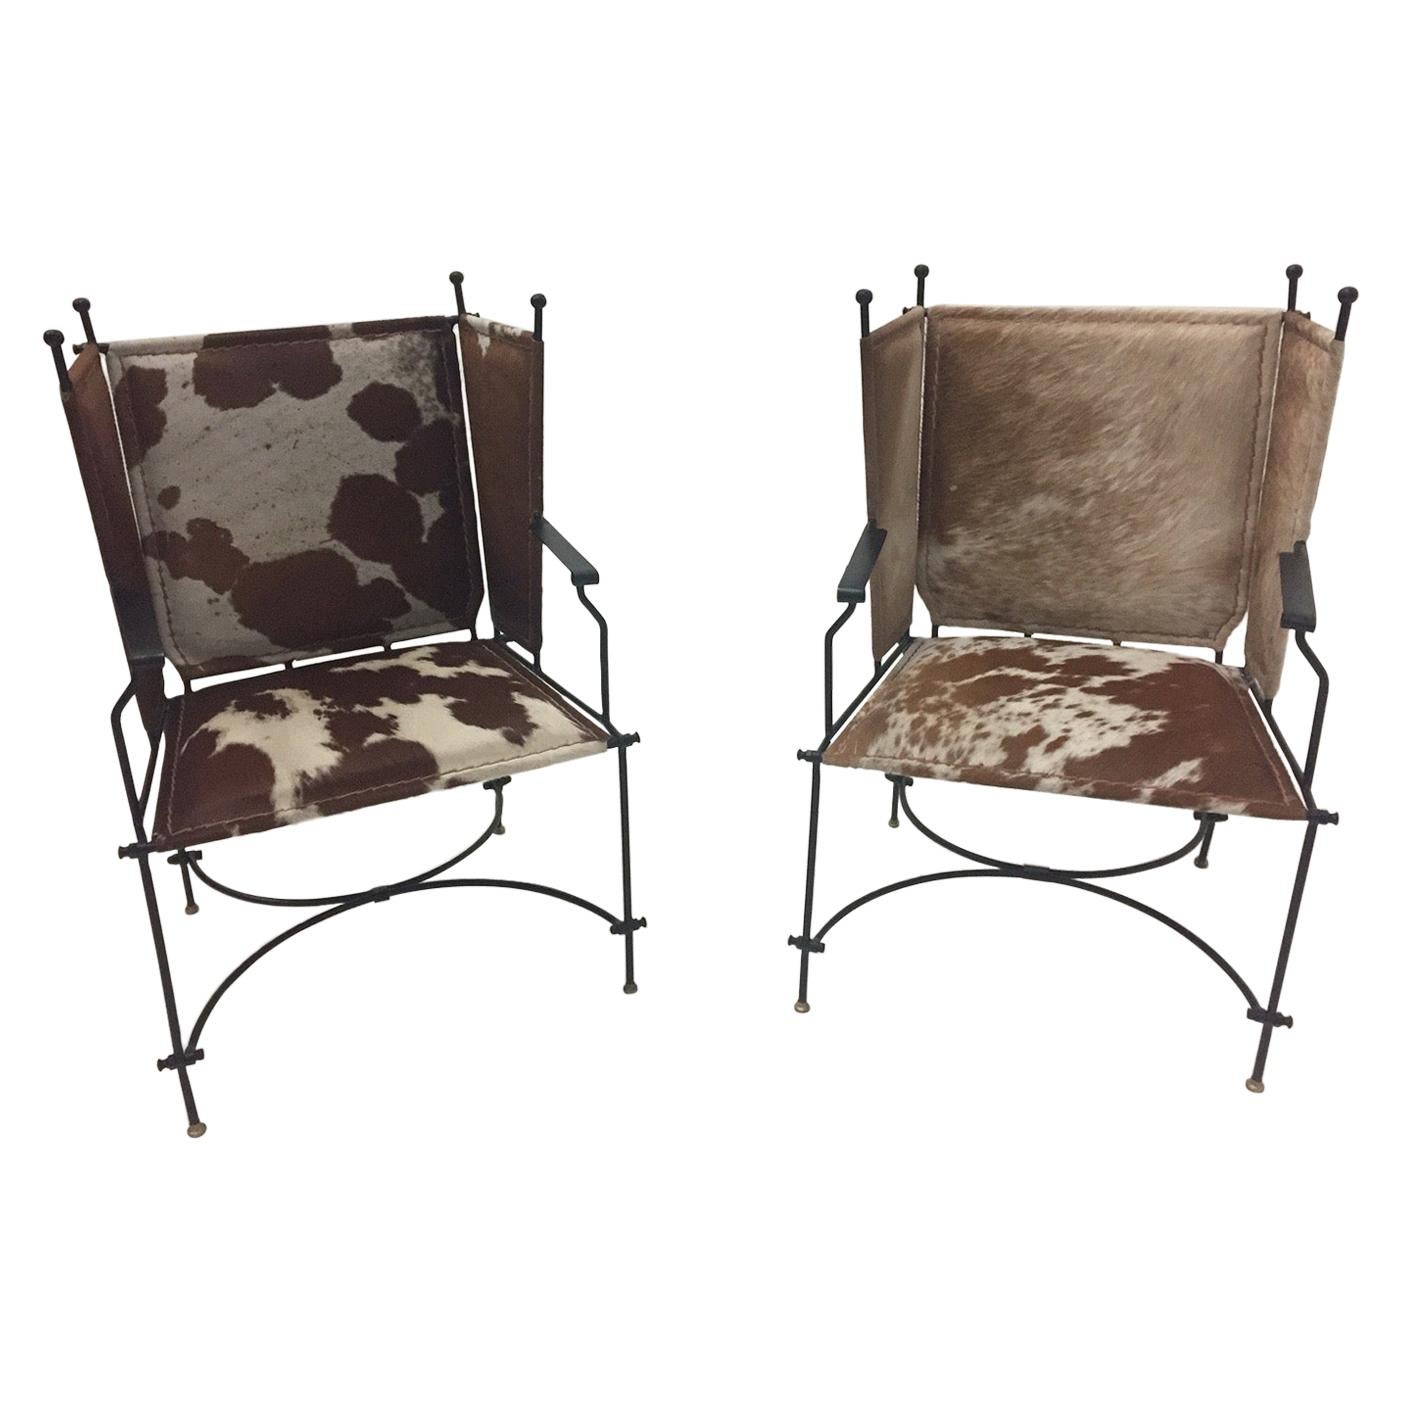 Sleek Pair of Wrought Iron Cowhide and Leather Mid-Century Modern Club Chairs